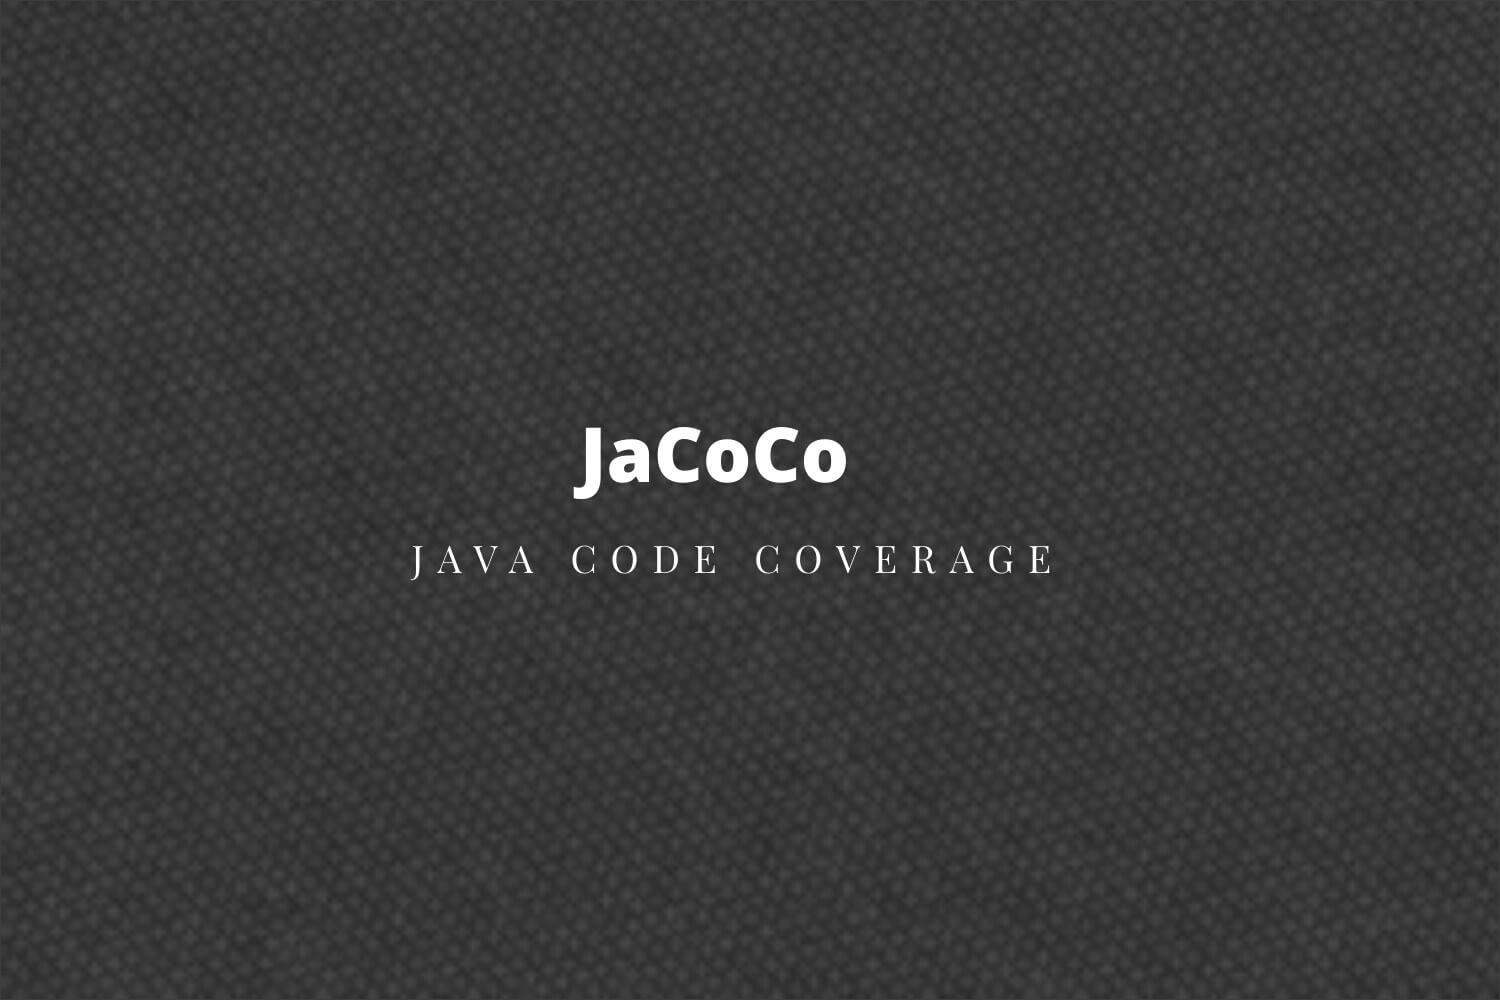 Generate global code coverage report in android development using JaCoCo plugin